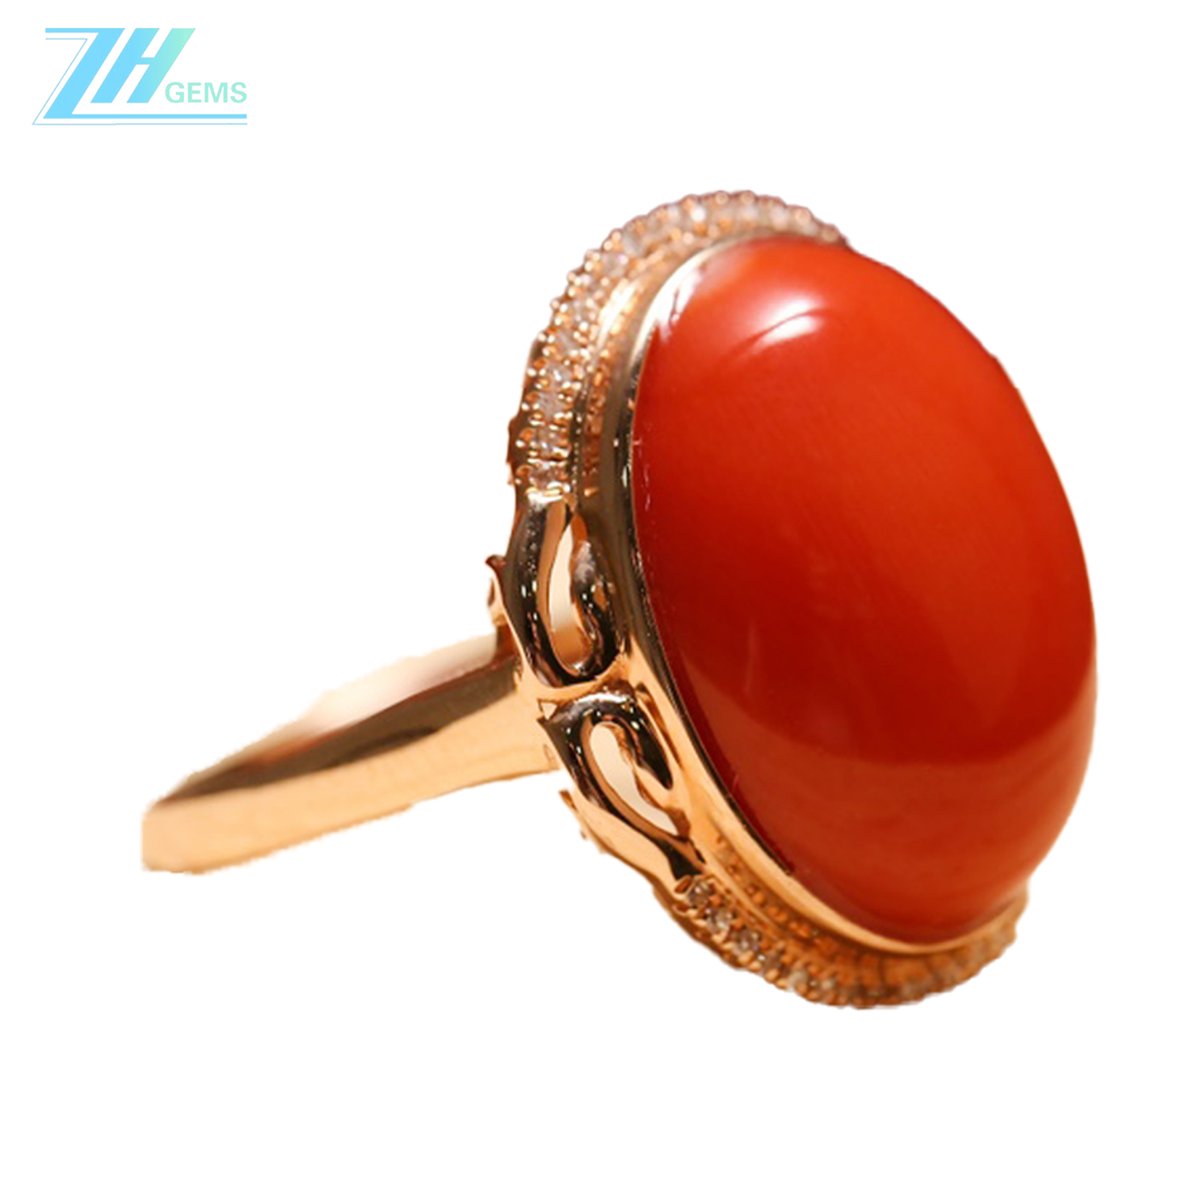 Boho Statement Ring  Coral Sterling Silver Ring for making Jewelry Holiday Gift  20240422-08-08  #EnvisionGreatness   #navajojewelry   #turquoisejewelry   #turquoise   #satisfying    #dayattheoffice    #suchascientist    #jewelrymaking    #stevenuniverse    #cartoonnetwork